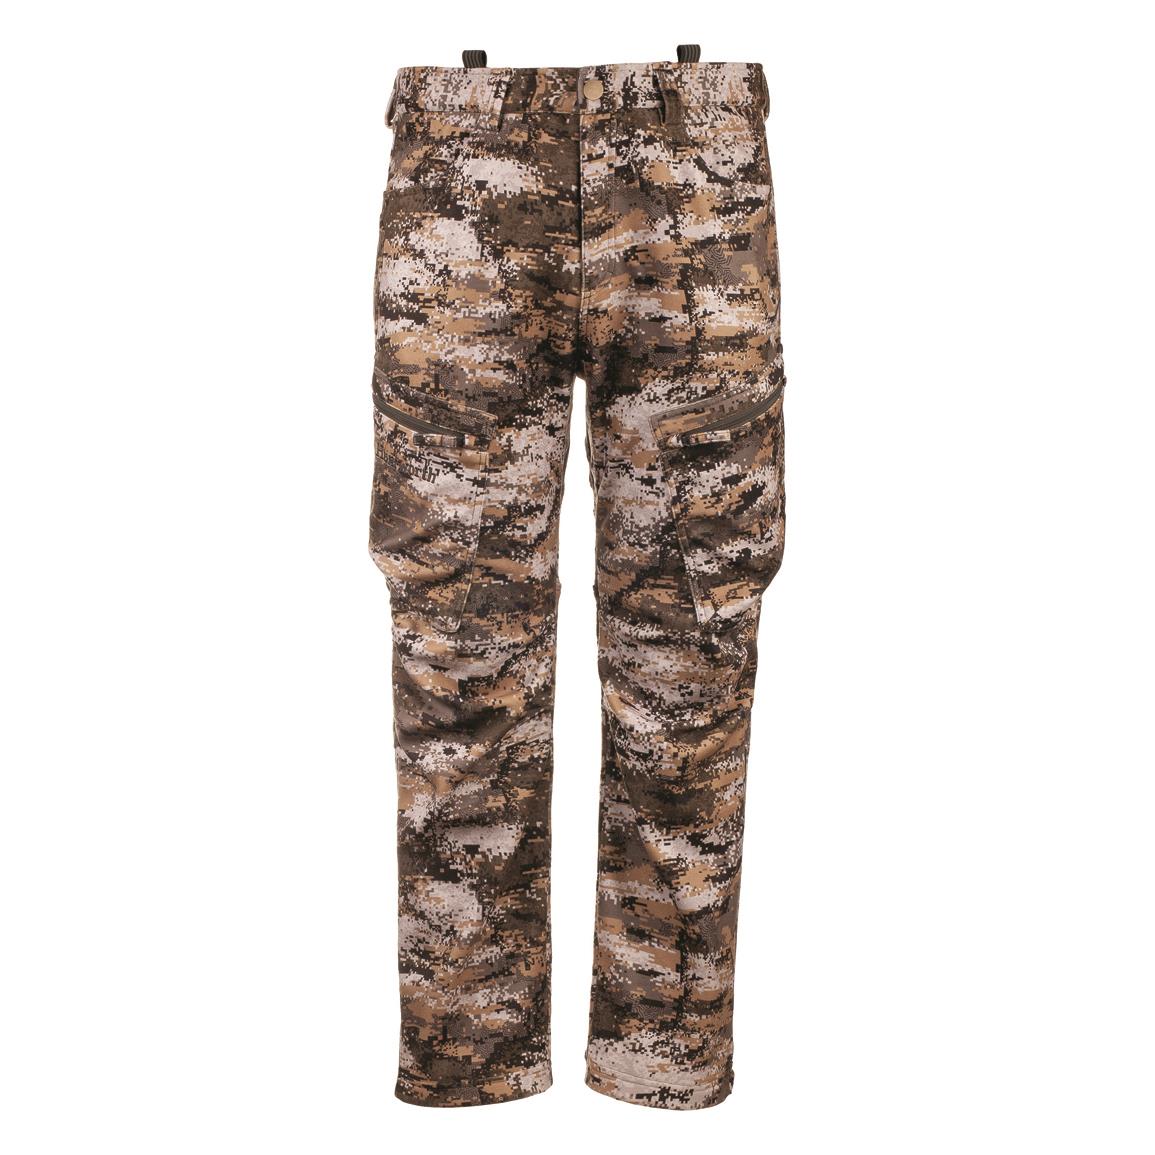 You Choose Ladies 5 Pocket Pant Jeans w/ Stretch Hunting Mossy Oak Brush Camo 